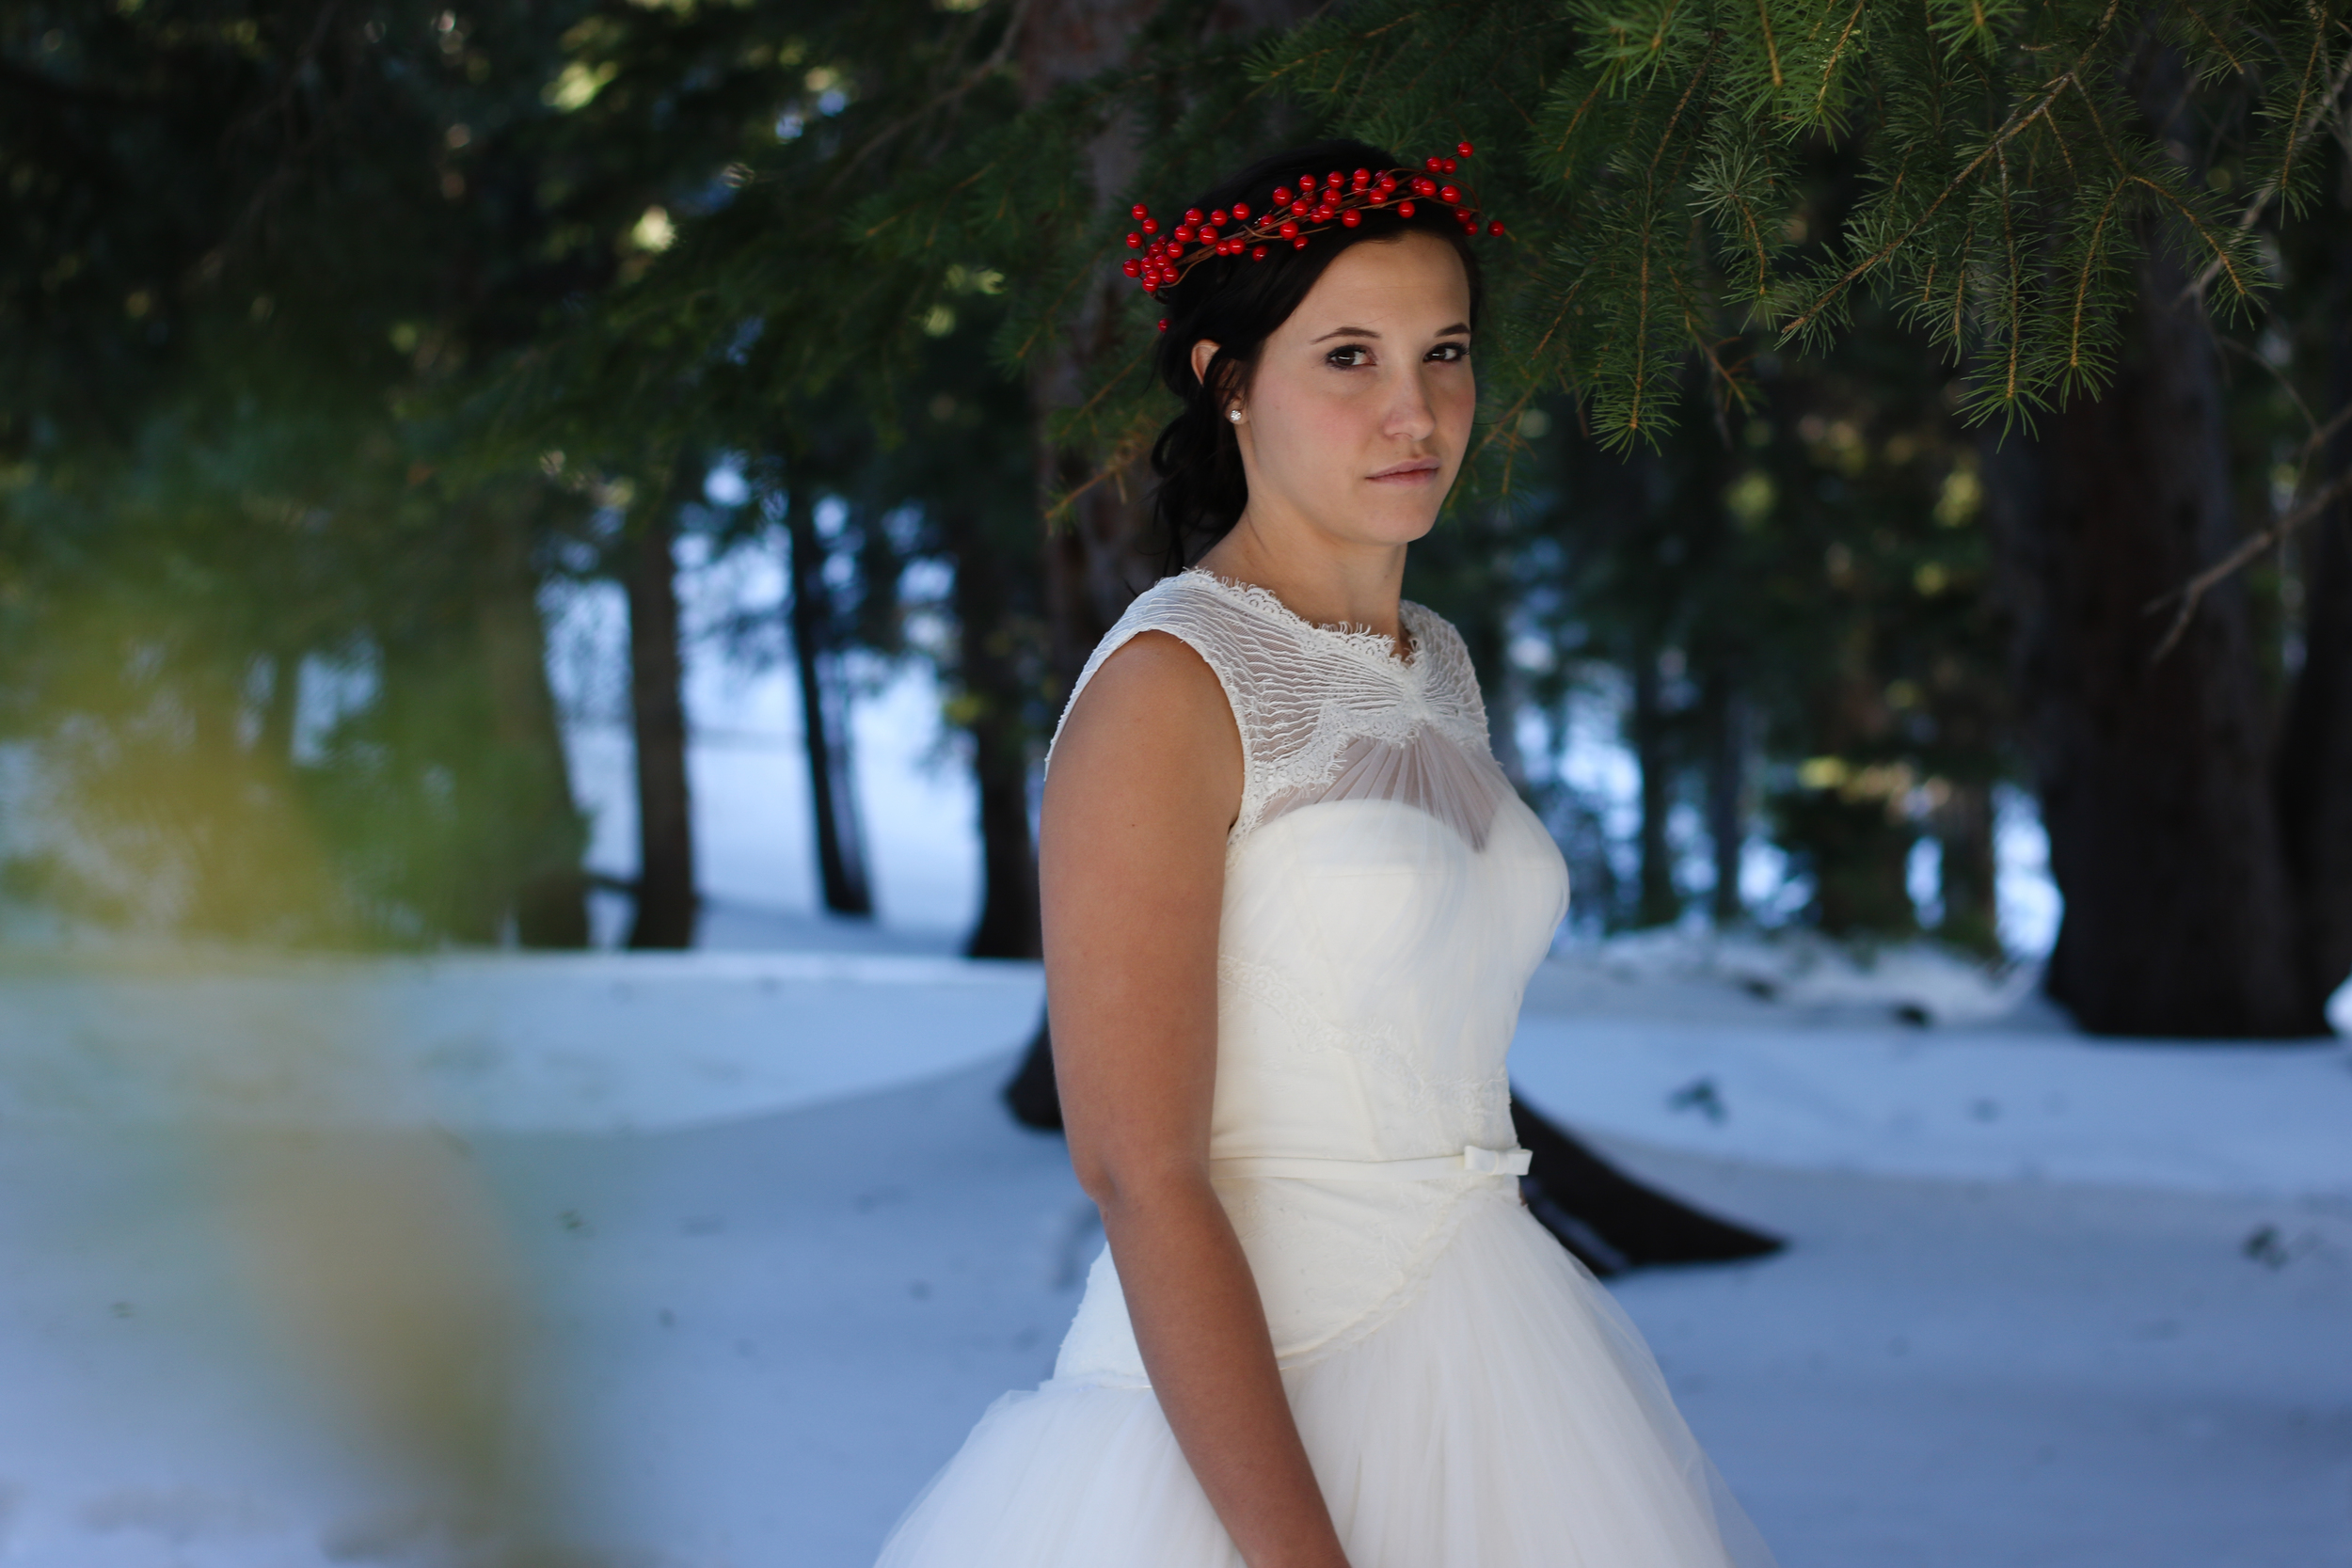 Bridals Photo Sessions in Utah by Captured By Lexi